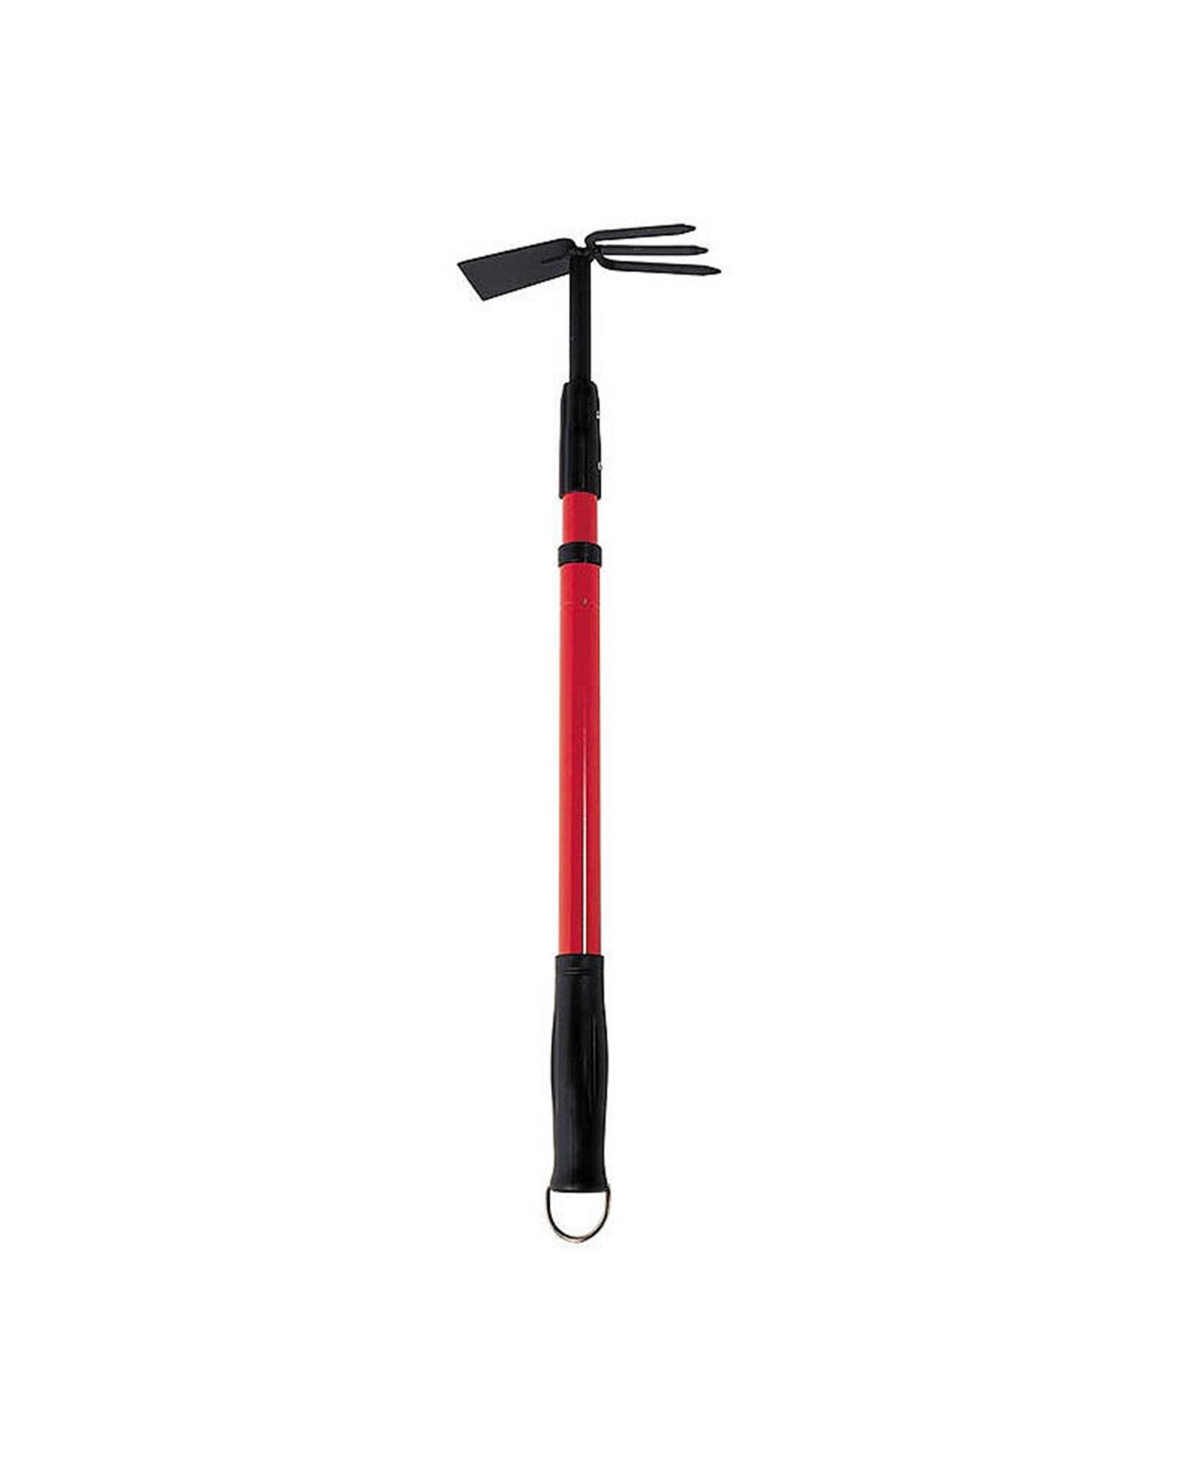 Bond Manufacturing LH016 Telescopic Culti-Hoe, Red Handle, 25-37 inches